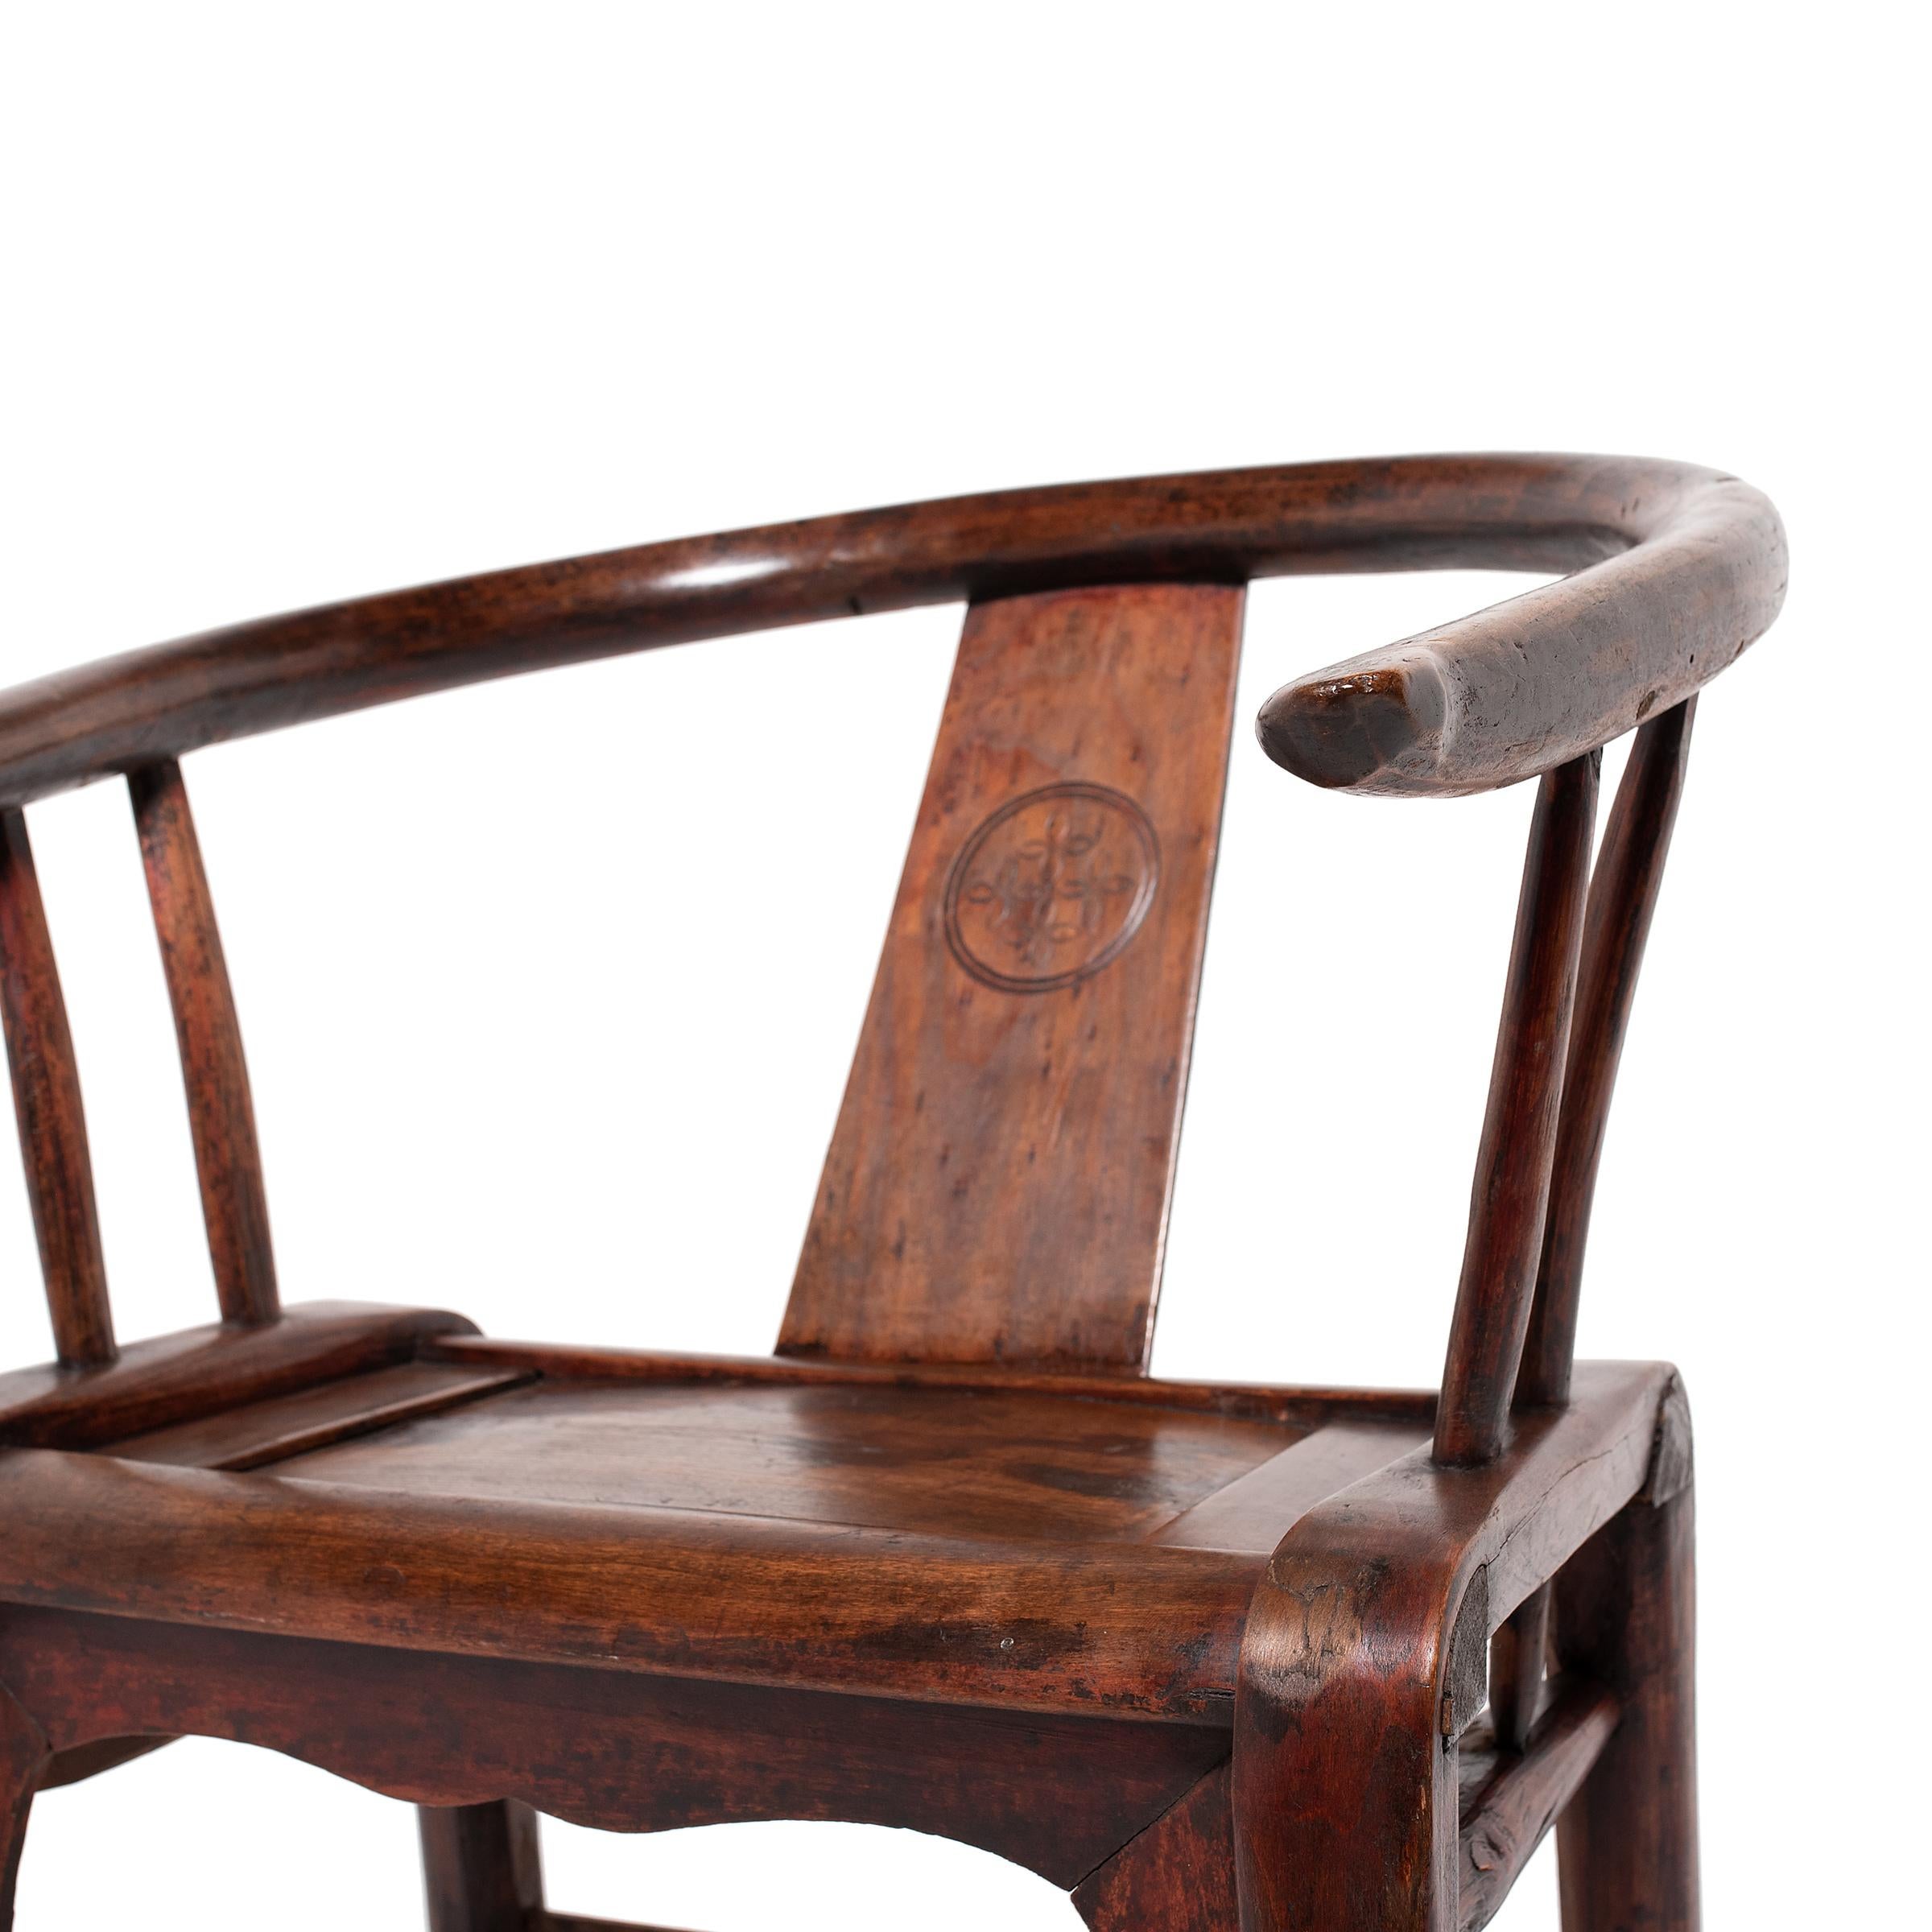 19th Century Chinese Lacquered Roundback Chair, c. 1850 For Sale